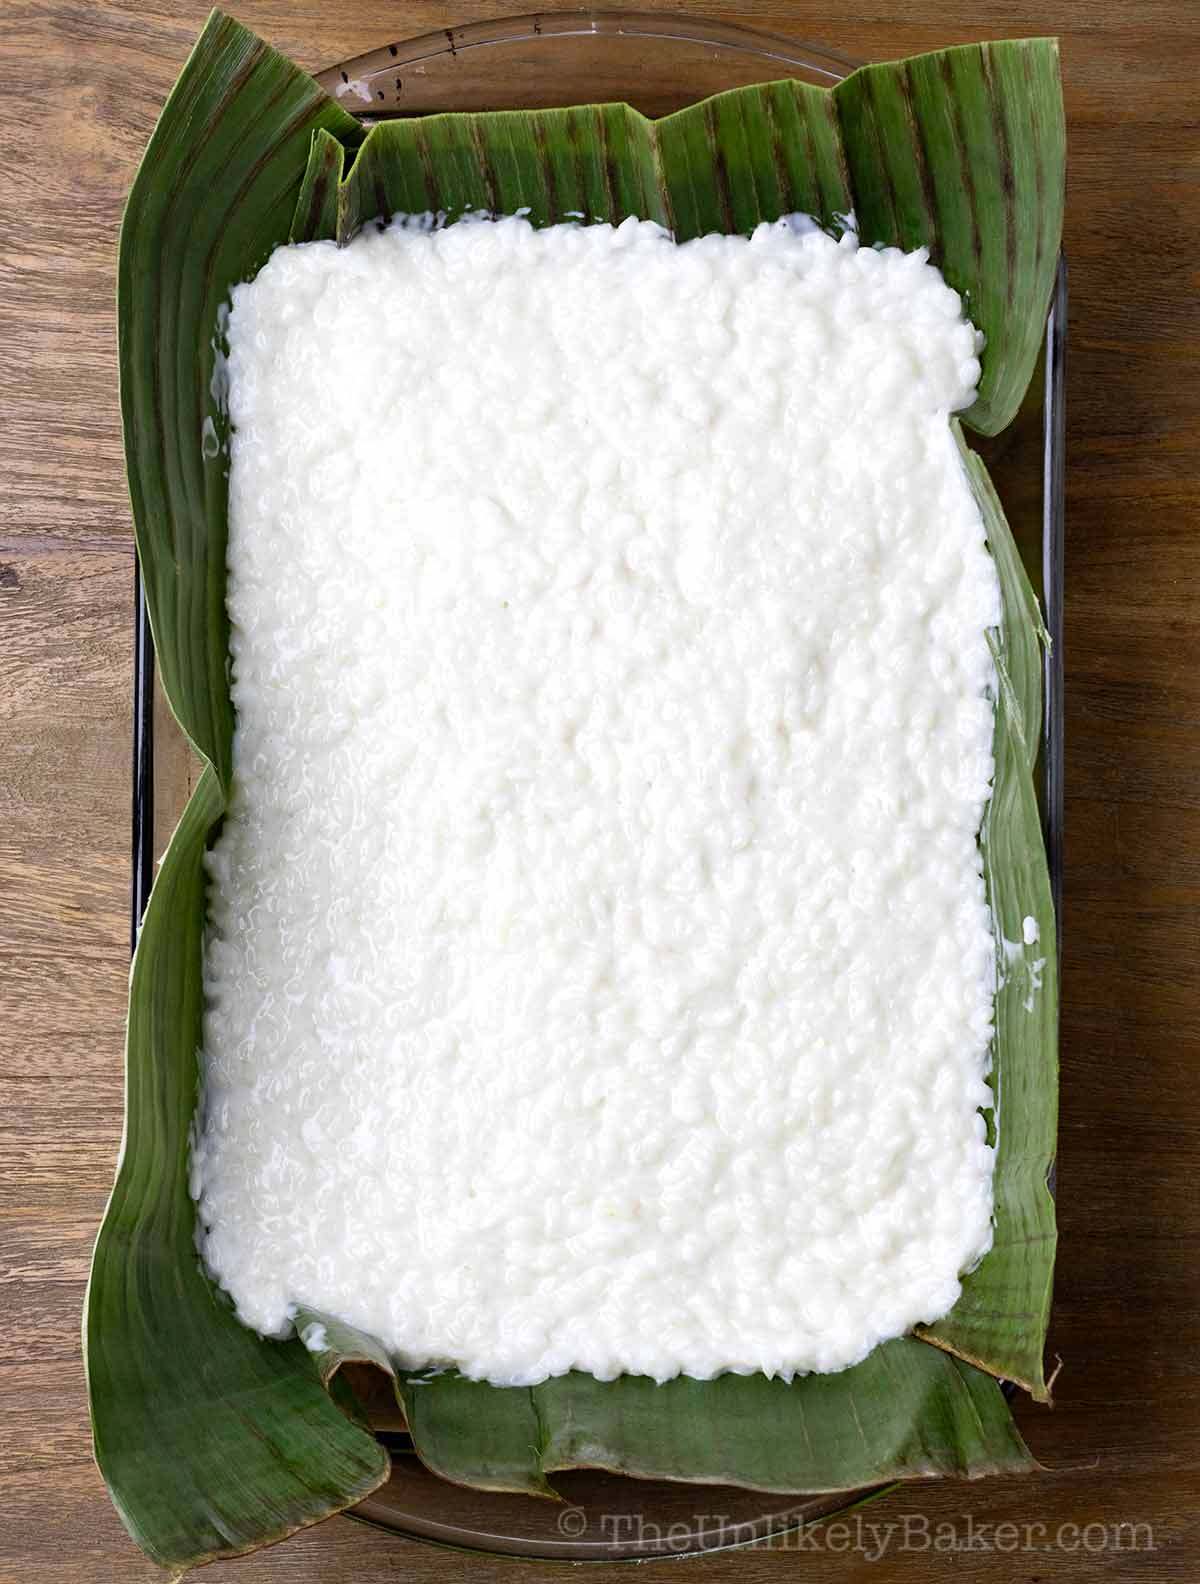 Cooked glutinous rice in a baking dish lined with banana leaves.